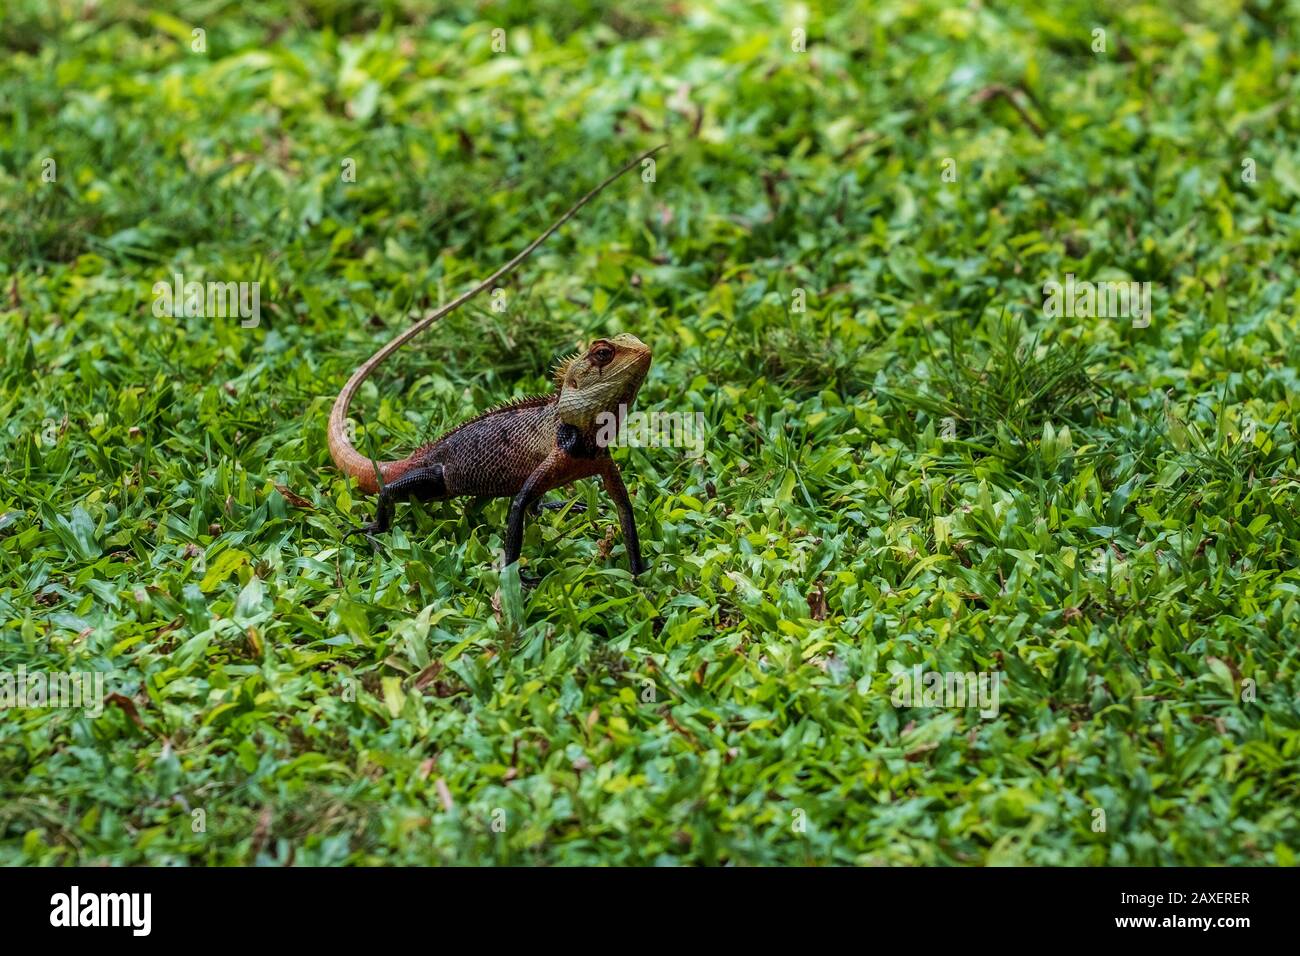 A garden lizard sitting in the lush green grass at the W Hotel in the Maldives Stock Photo